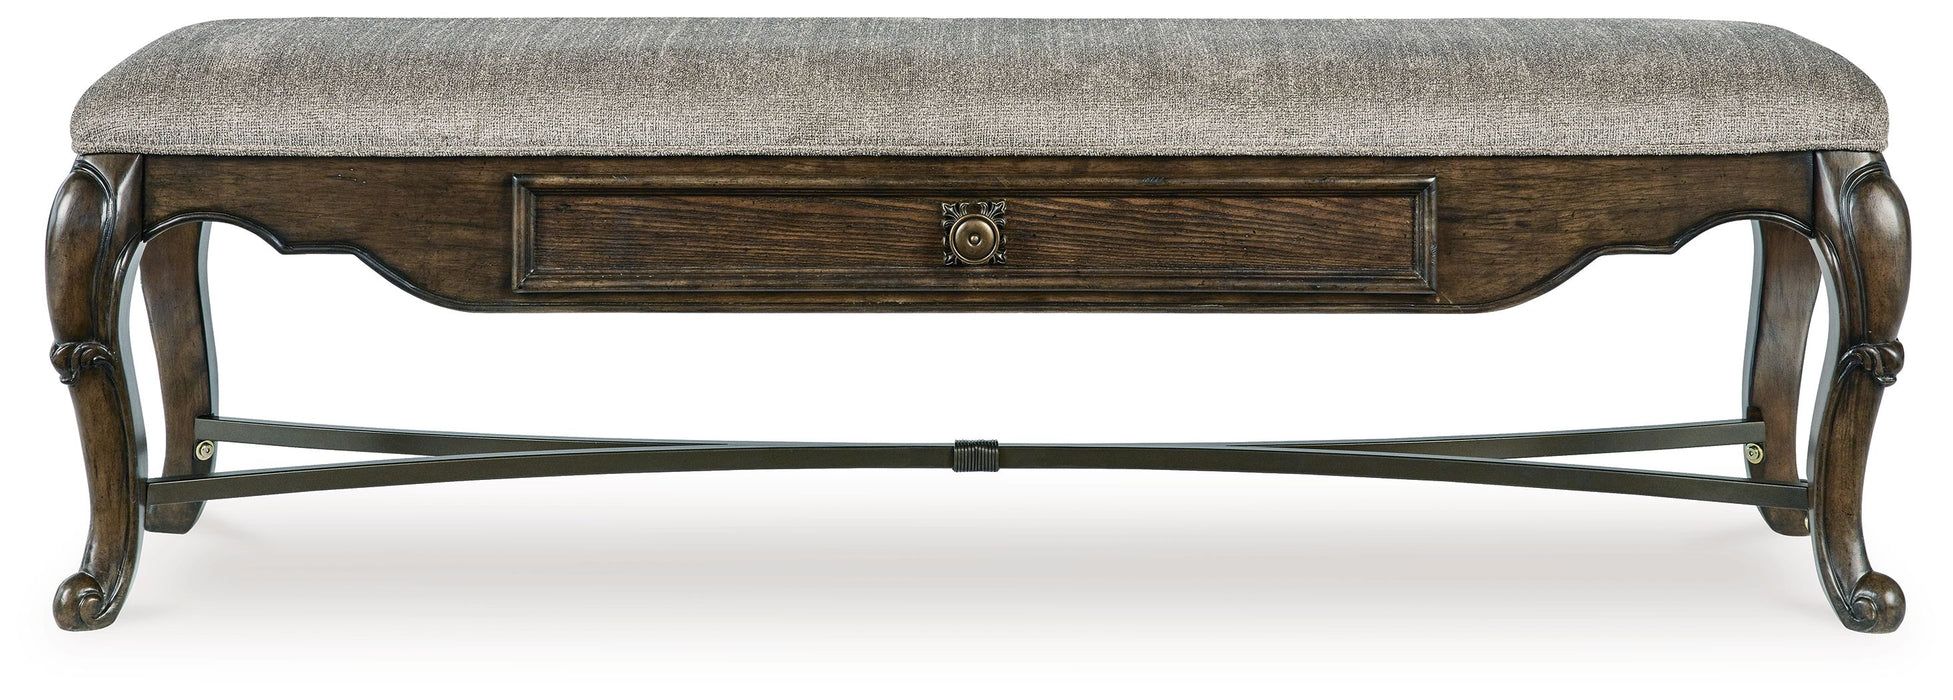 Maylee - Dark Brown - Upholstered Storage Bench Capital Discount Furniture Home Furniture, Furniture Store